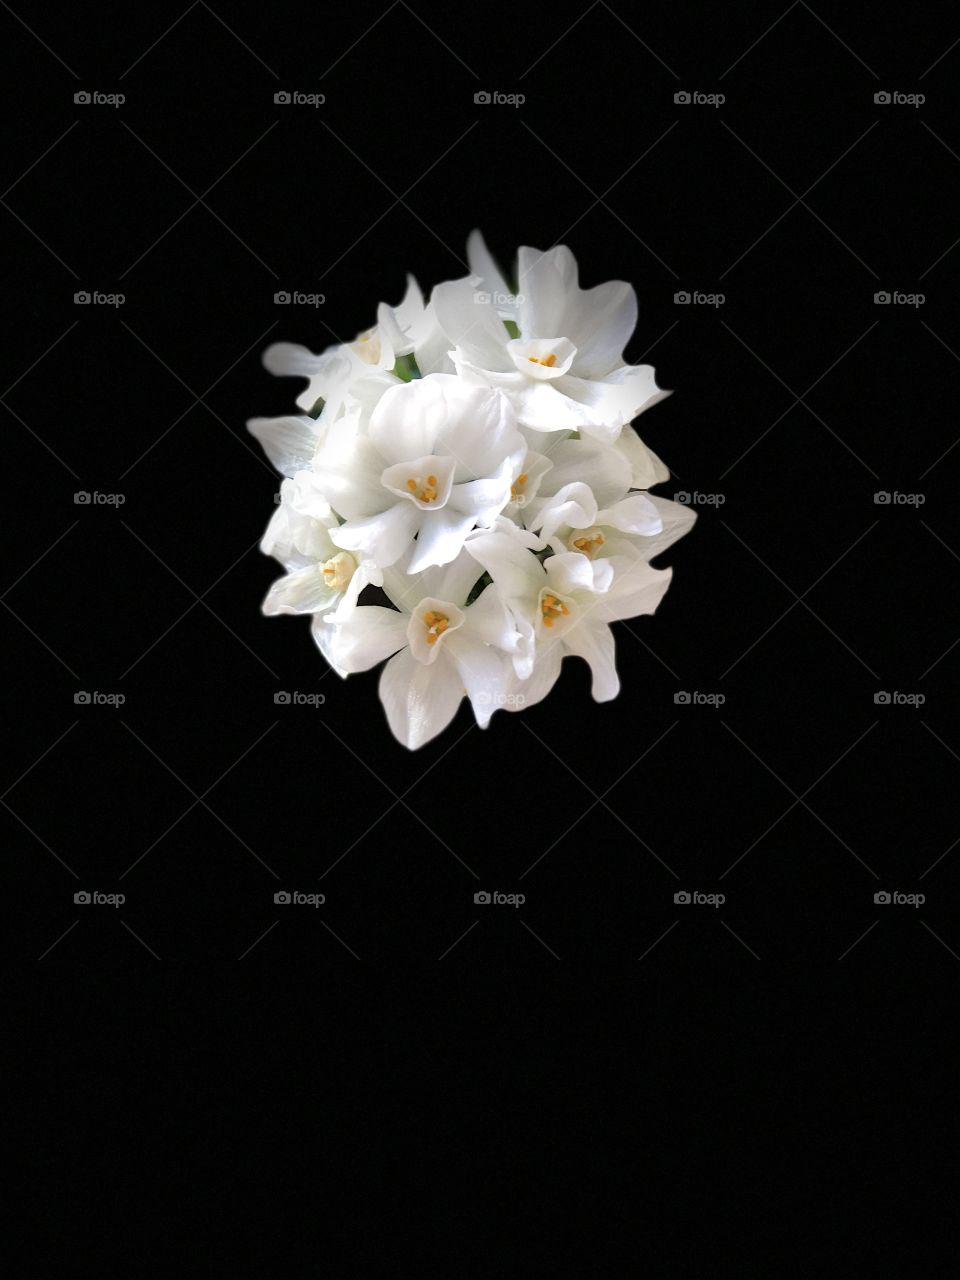 Beautiful and Simplistic Solo Paperwhite Bulb On Black Background. Stunning Canvas Art, Screensavers, Desktop or Wall Art!